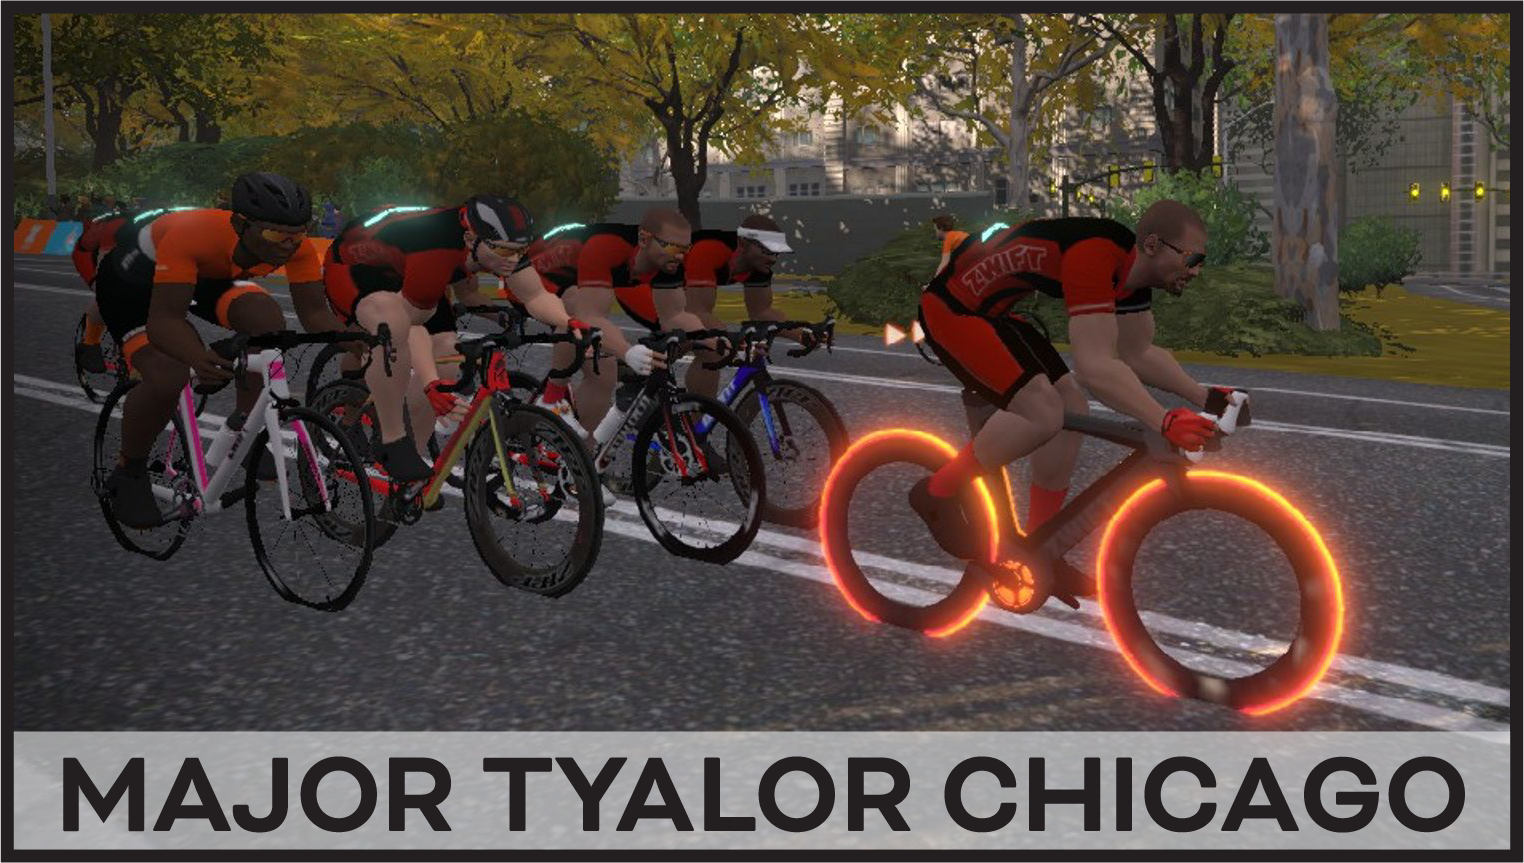 mtc# zWIFT gROUP bANNER 1.png